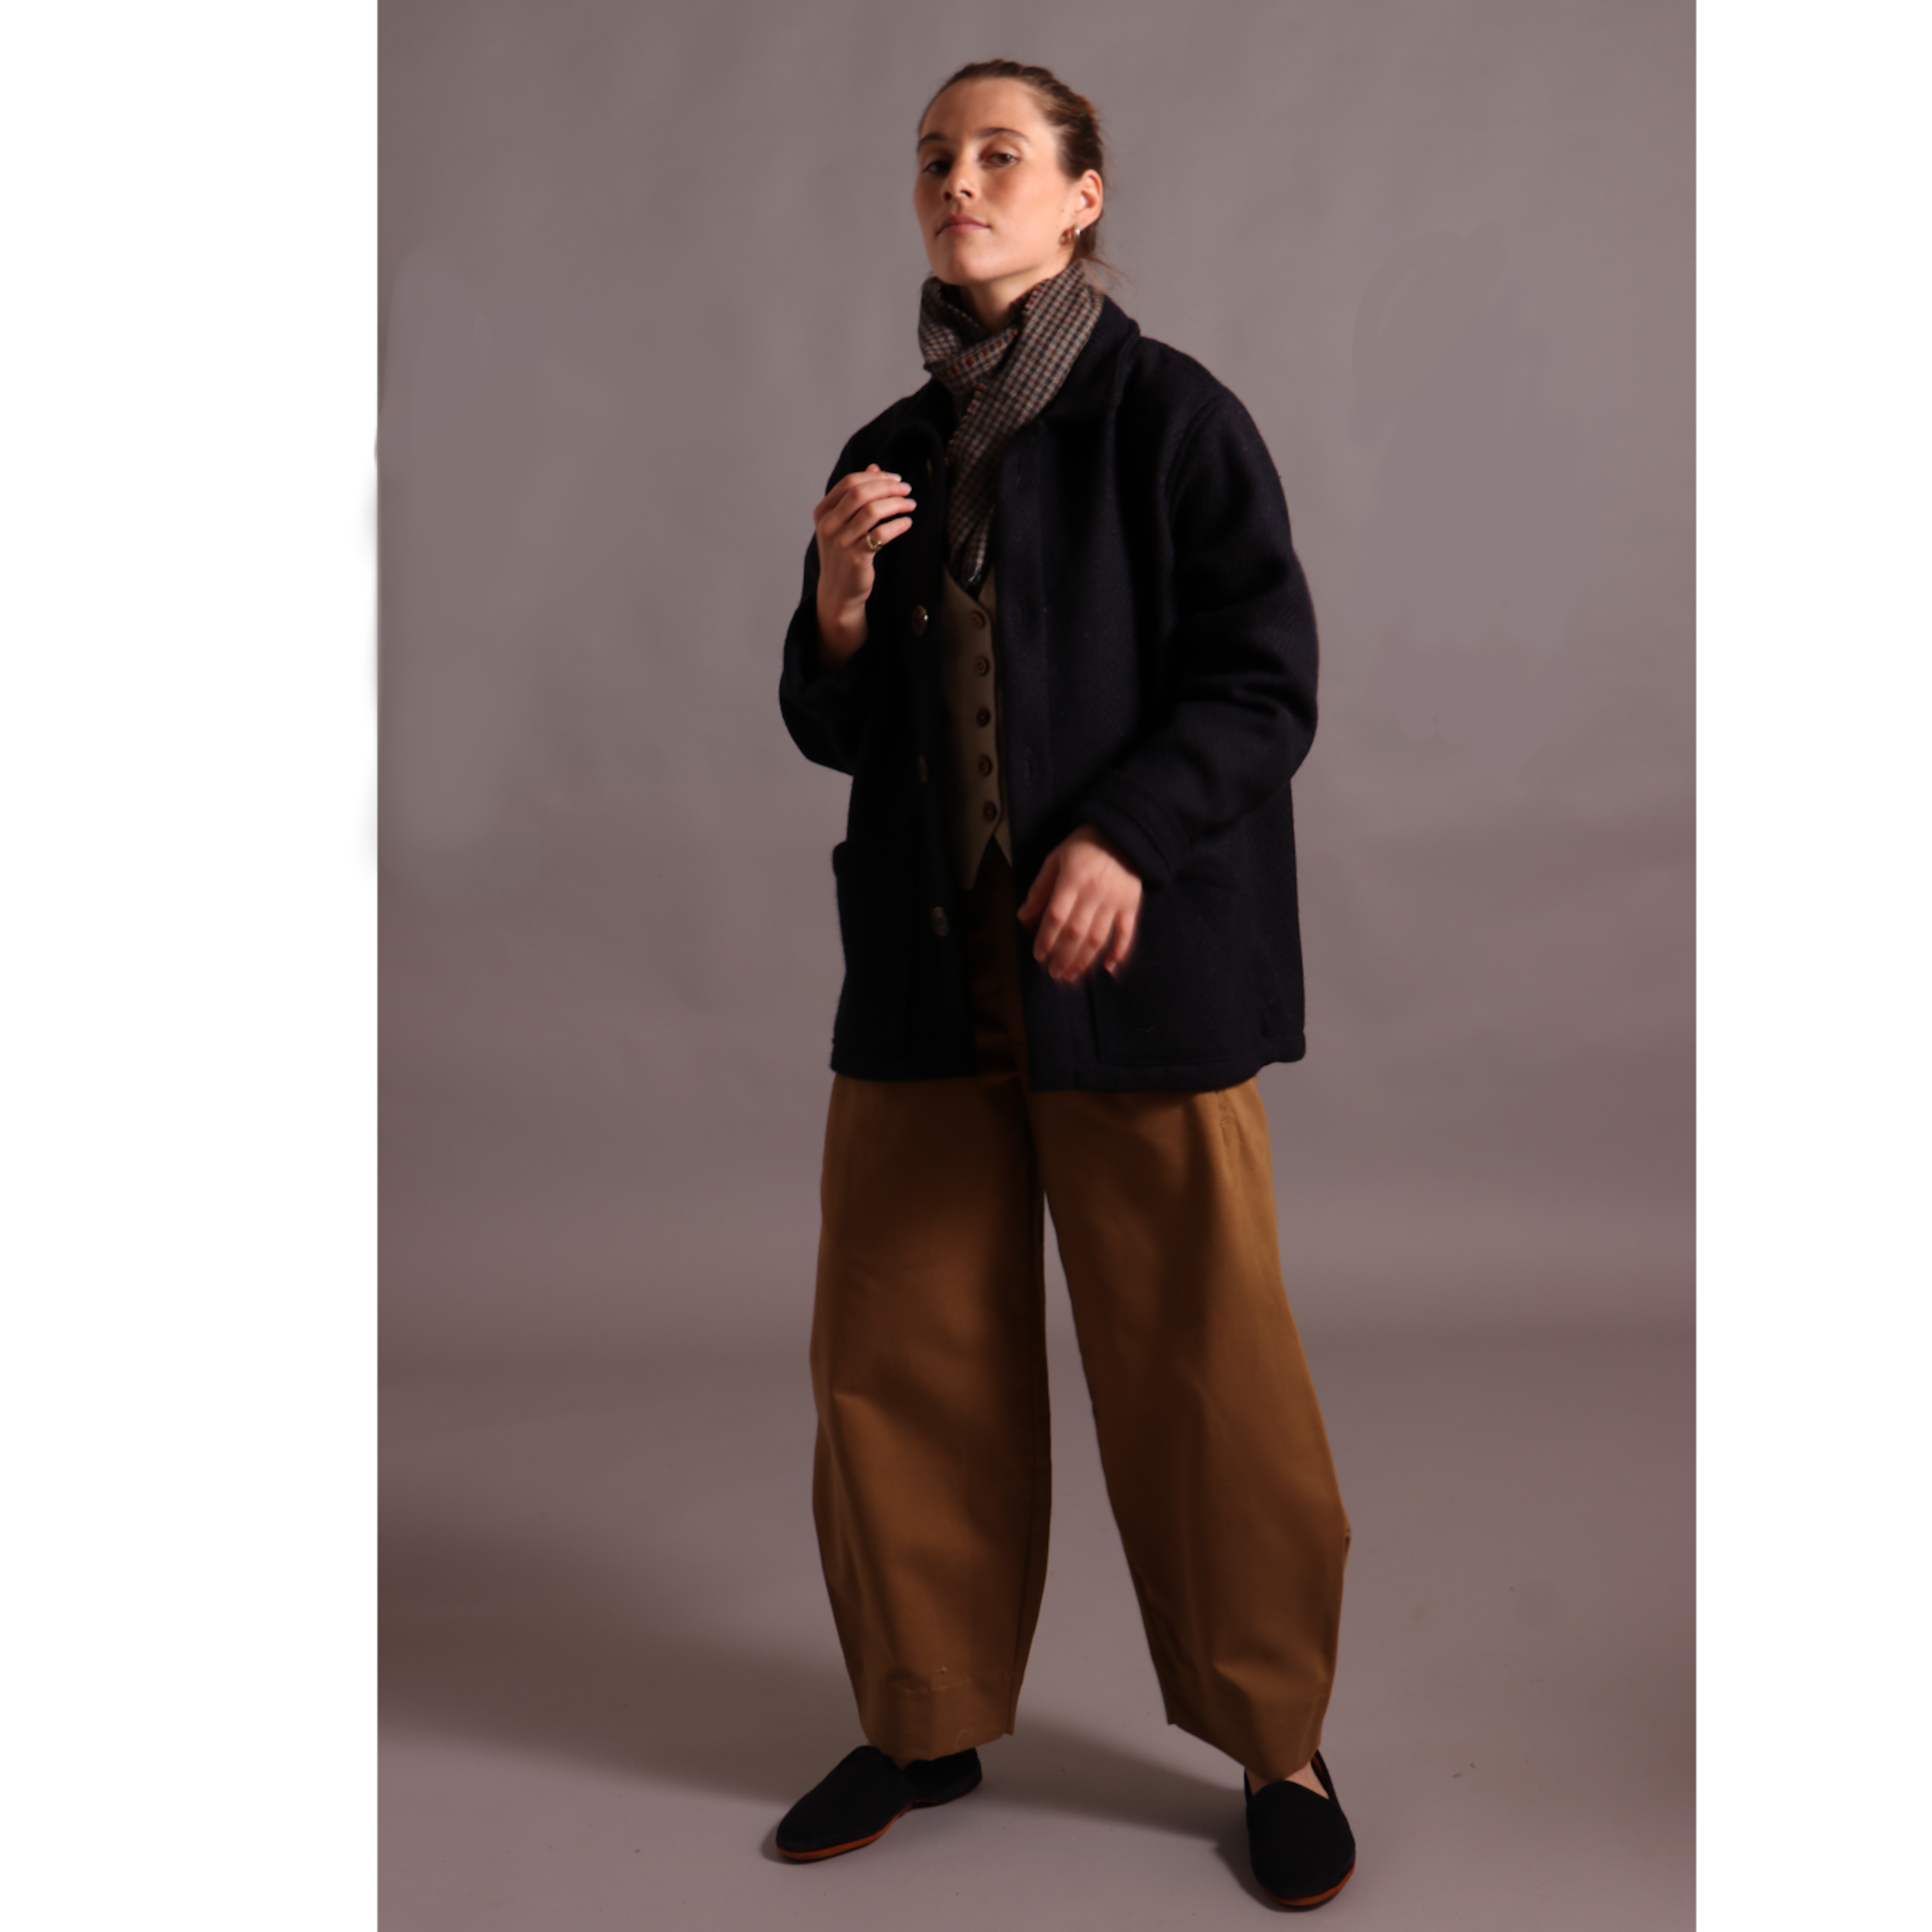 Decca wears Carrier Company Celtic Wool Jacket with Dutch trouser in Tan Cotton Drill, Wool Waistcoat and Scarf